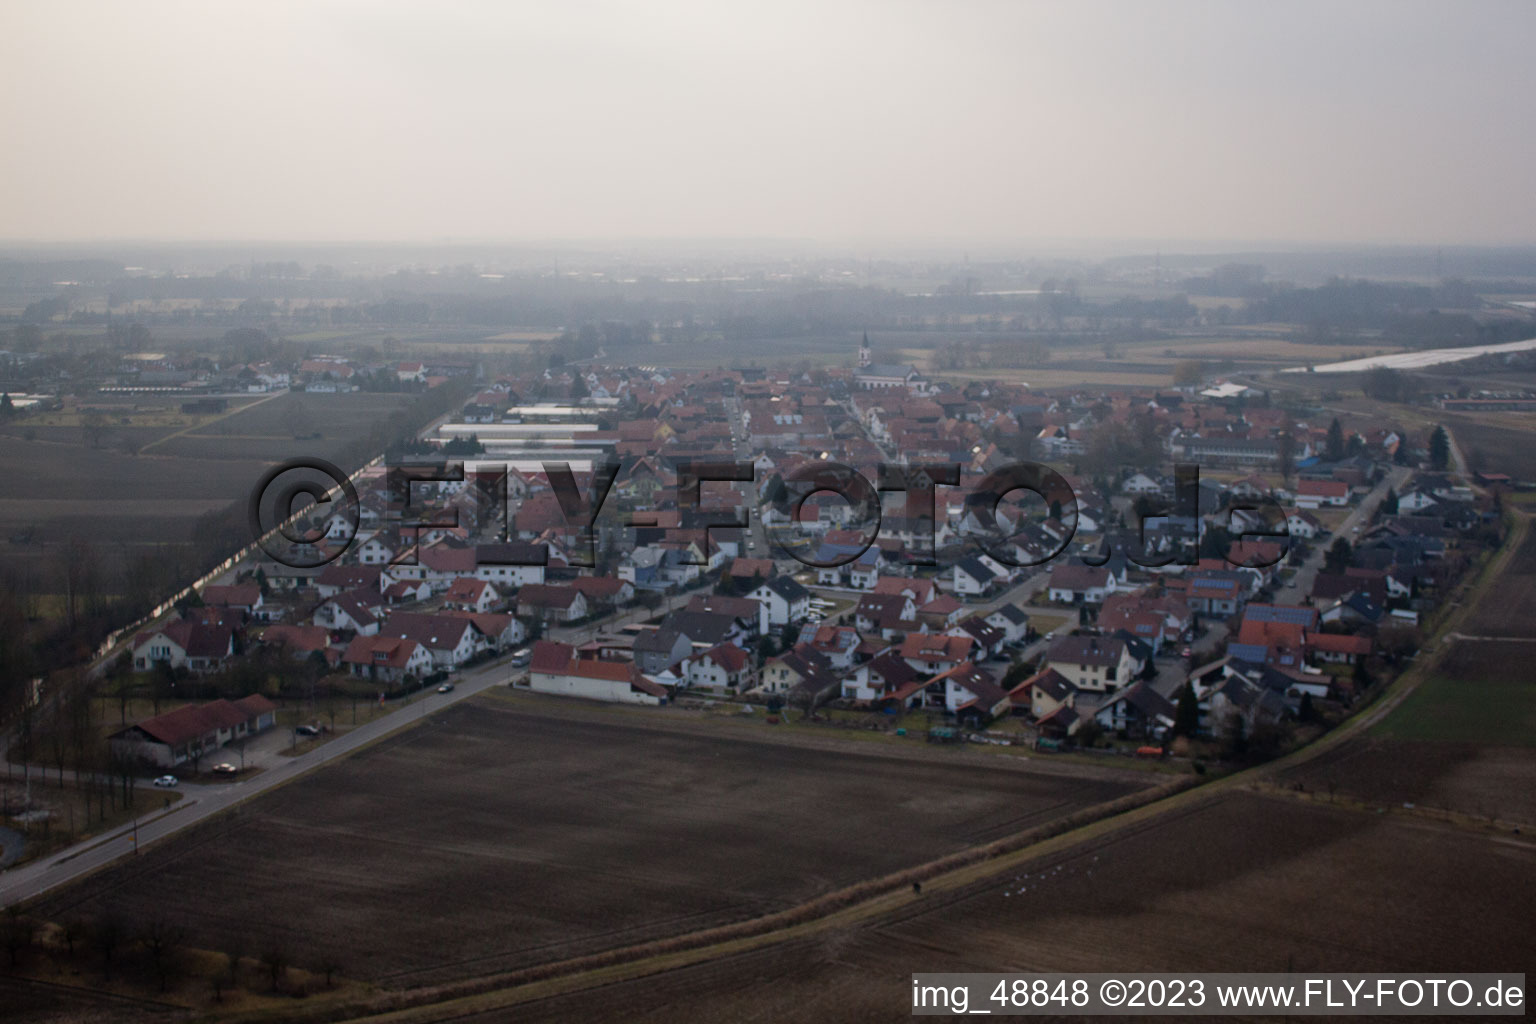 Aerial photograpy of Neupotz in the state Rhineland-Palatinate, Germany